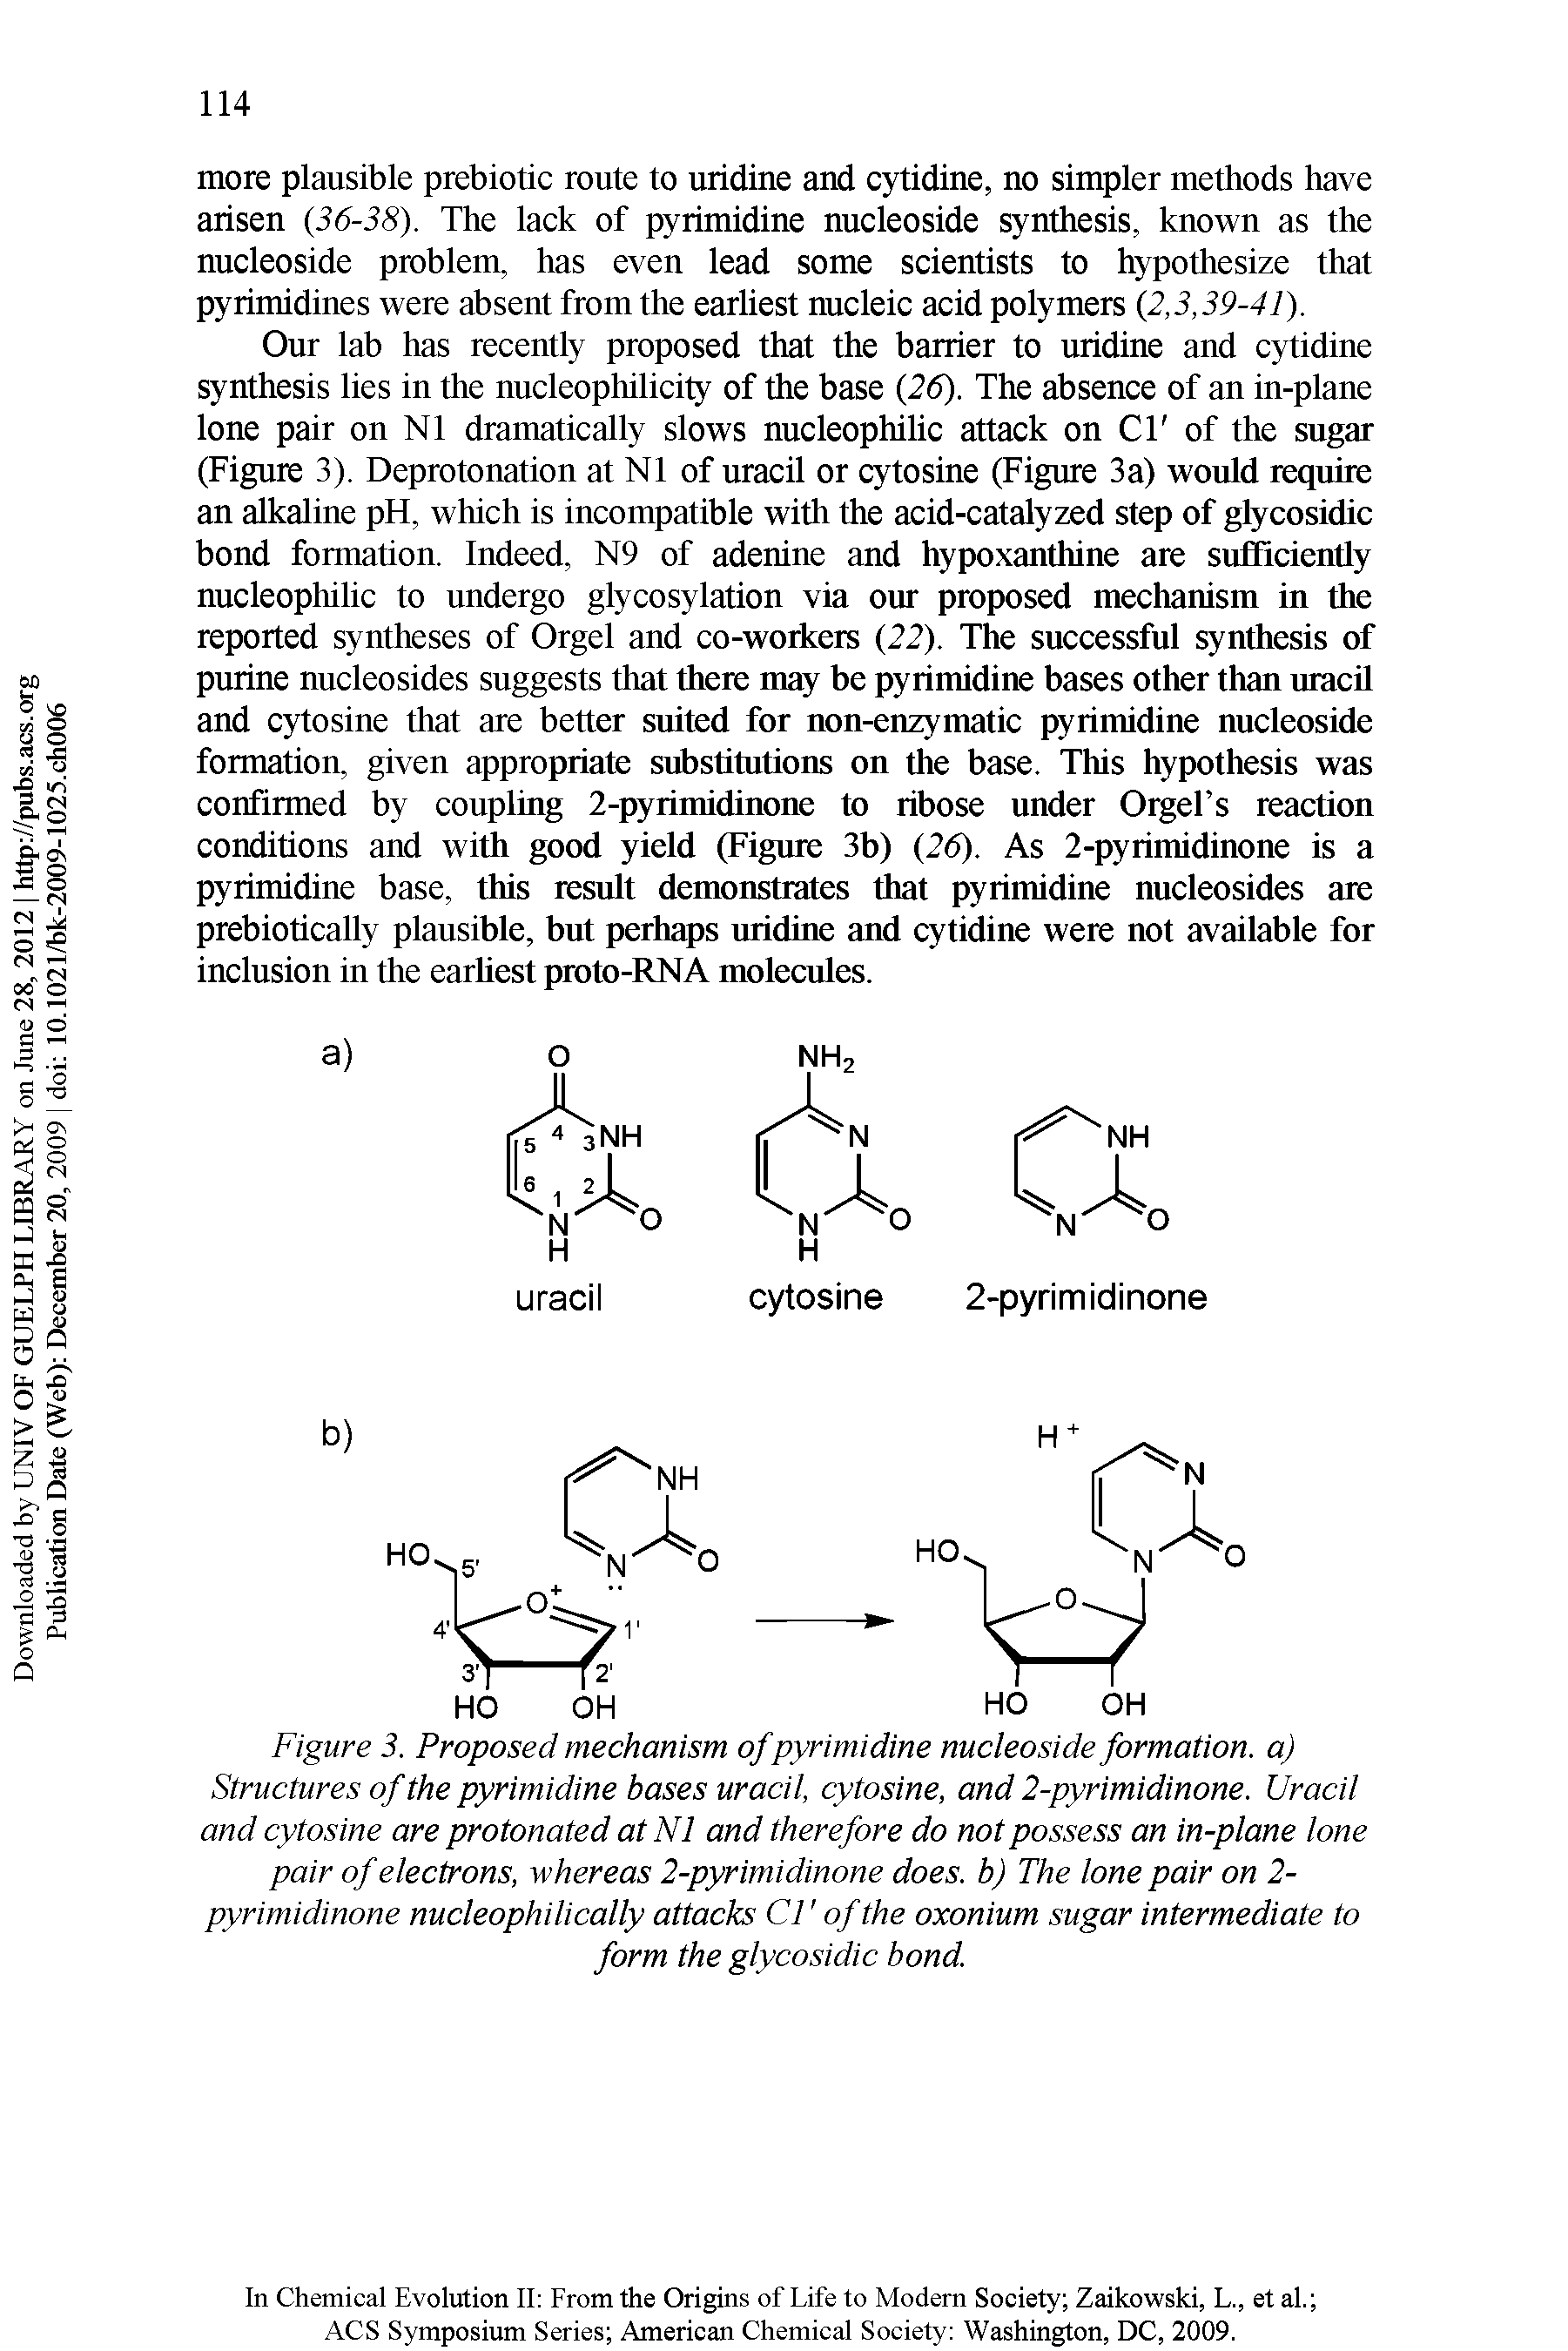 Figure 3. Proposed mechanism of pyrimidine nucleoside formation, a) Structures of the pyrimidine bases uracil, cytosine, and 2-pyrimidinone. Uracil and cytosine are protonated at N1 and therefore do not possess an in-plane lone pair of electrons, whereas 2-pyrimidinone does, b) The lone pair on 2-pyrimidinone nucleophilically attacks Cl of the oxonium sugar intermediate to form the glycosidic bond.